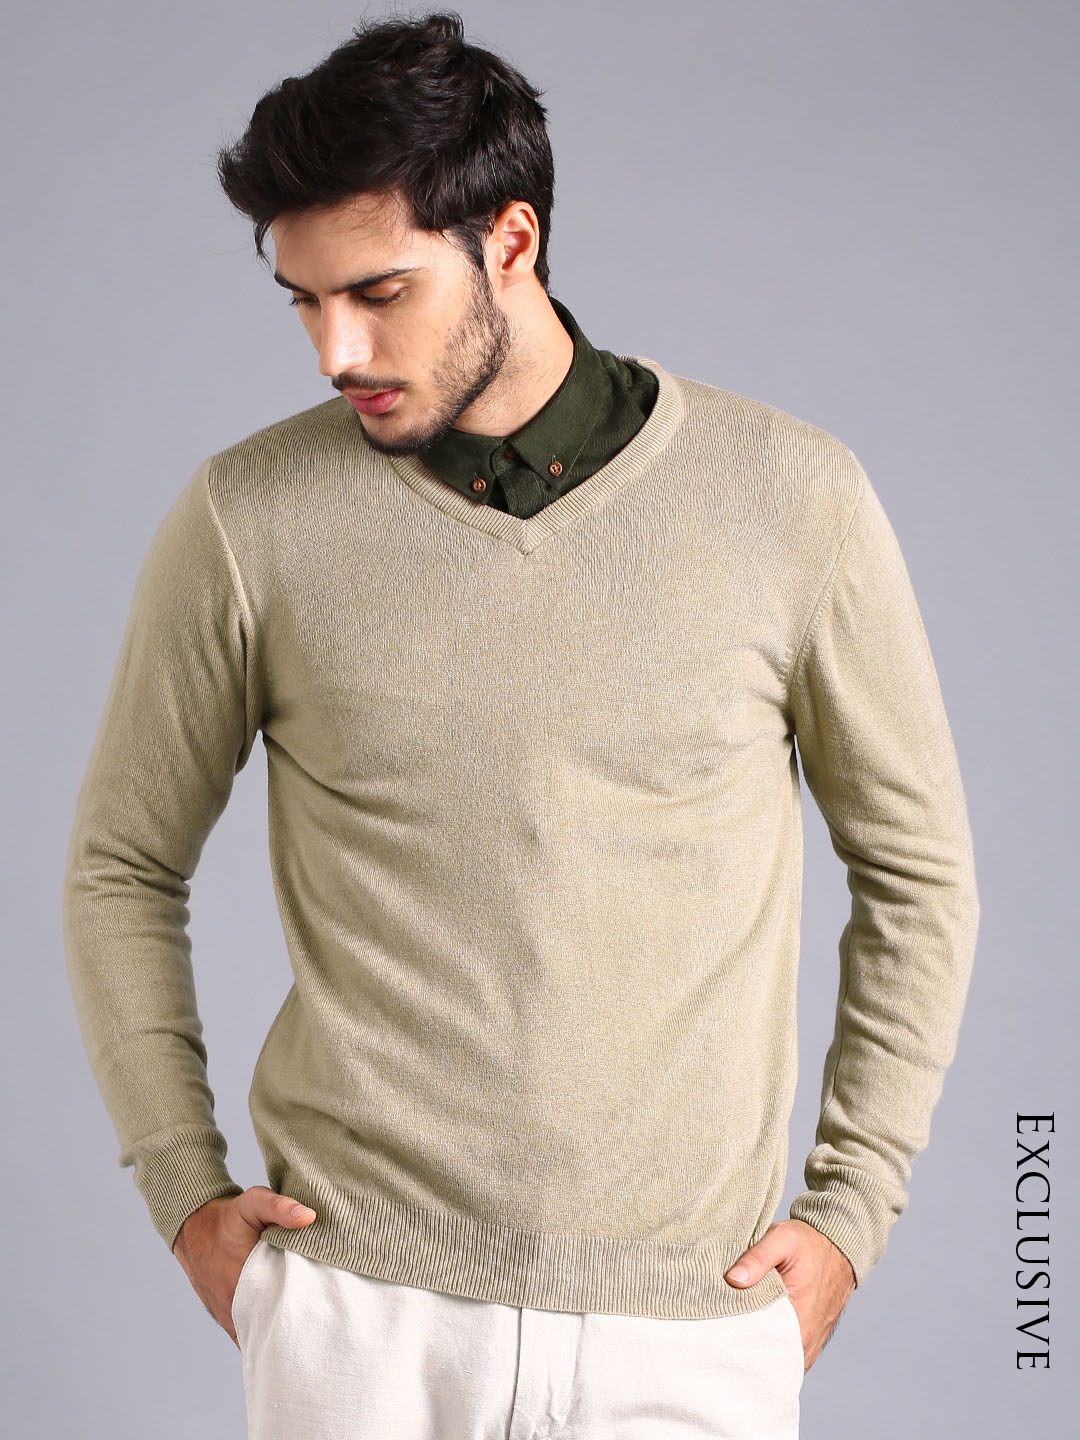 Buy ETHER Beige Super Soft Sweater - Sweaters for Men 965961